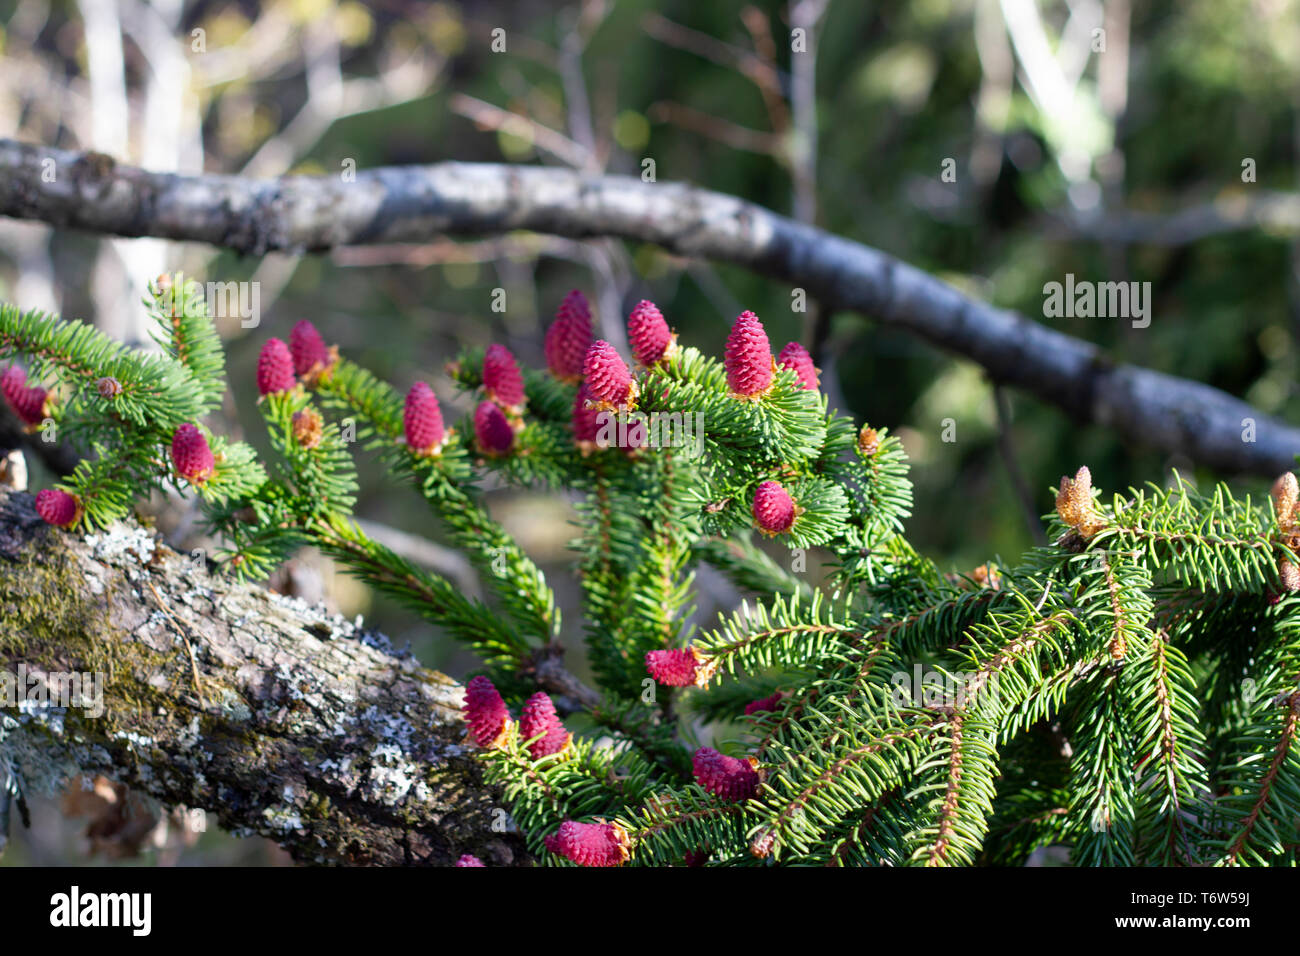 Young spruce cones on a fallen down tree in the woods. Stock Photo